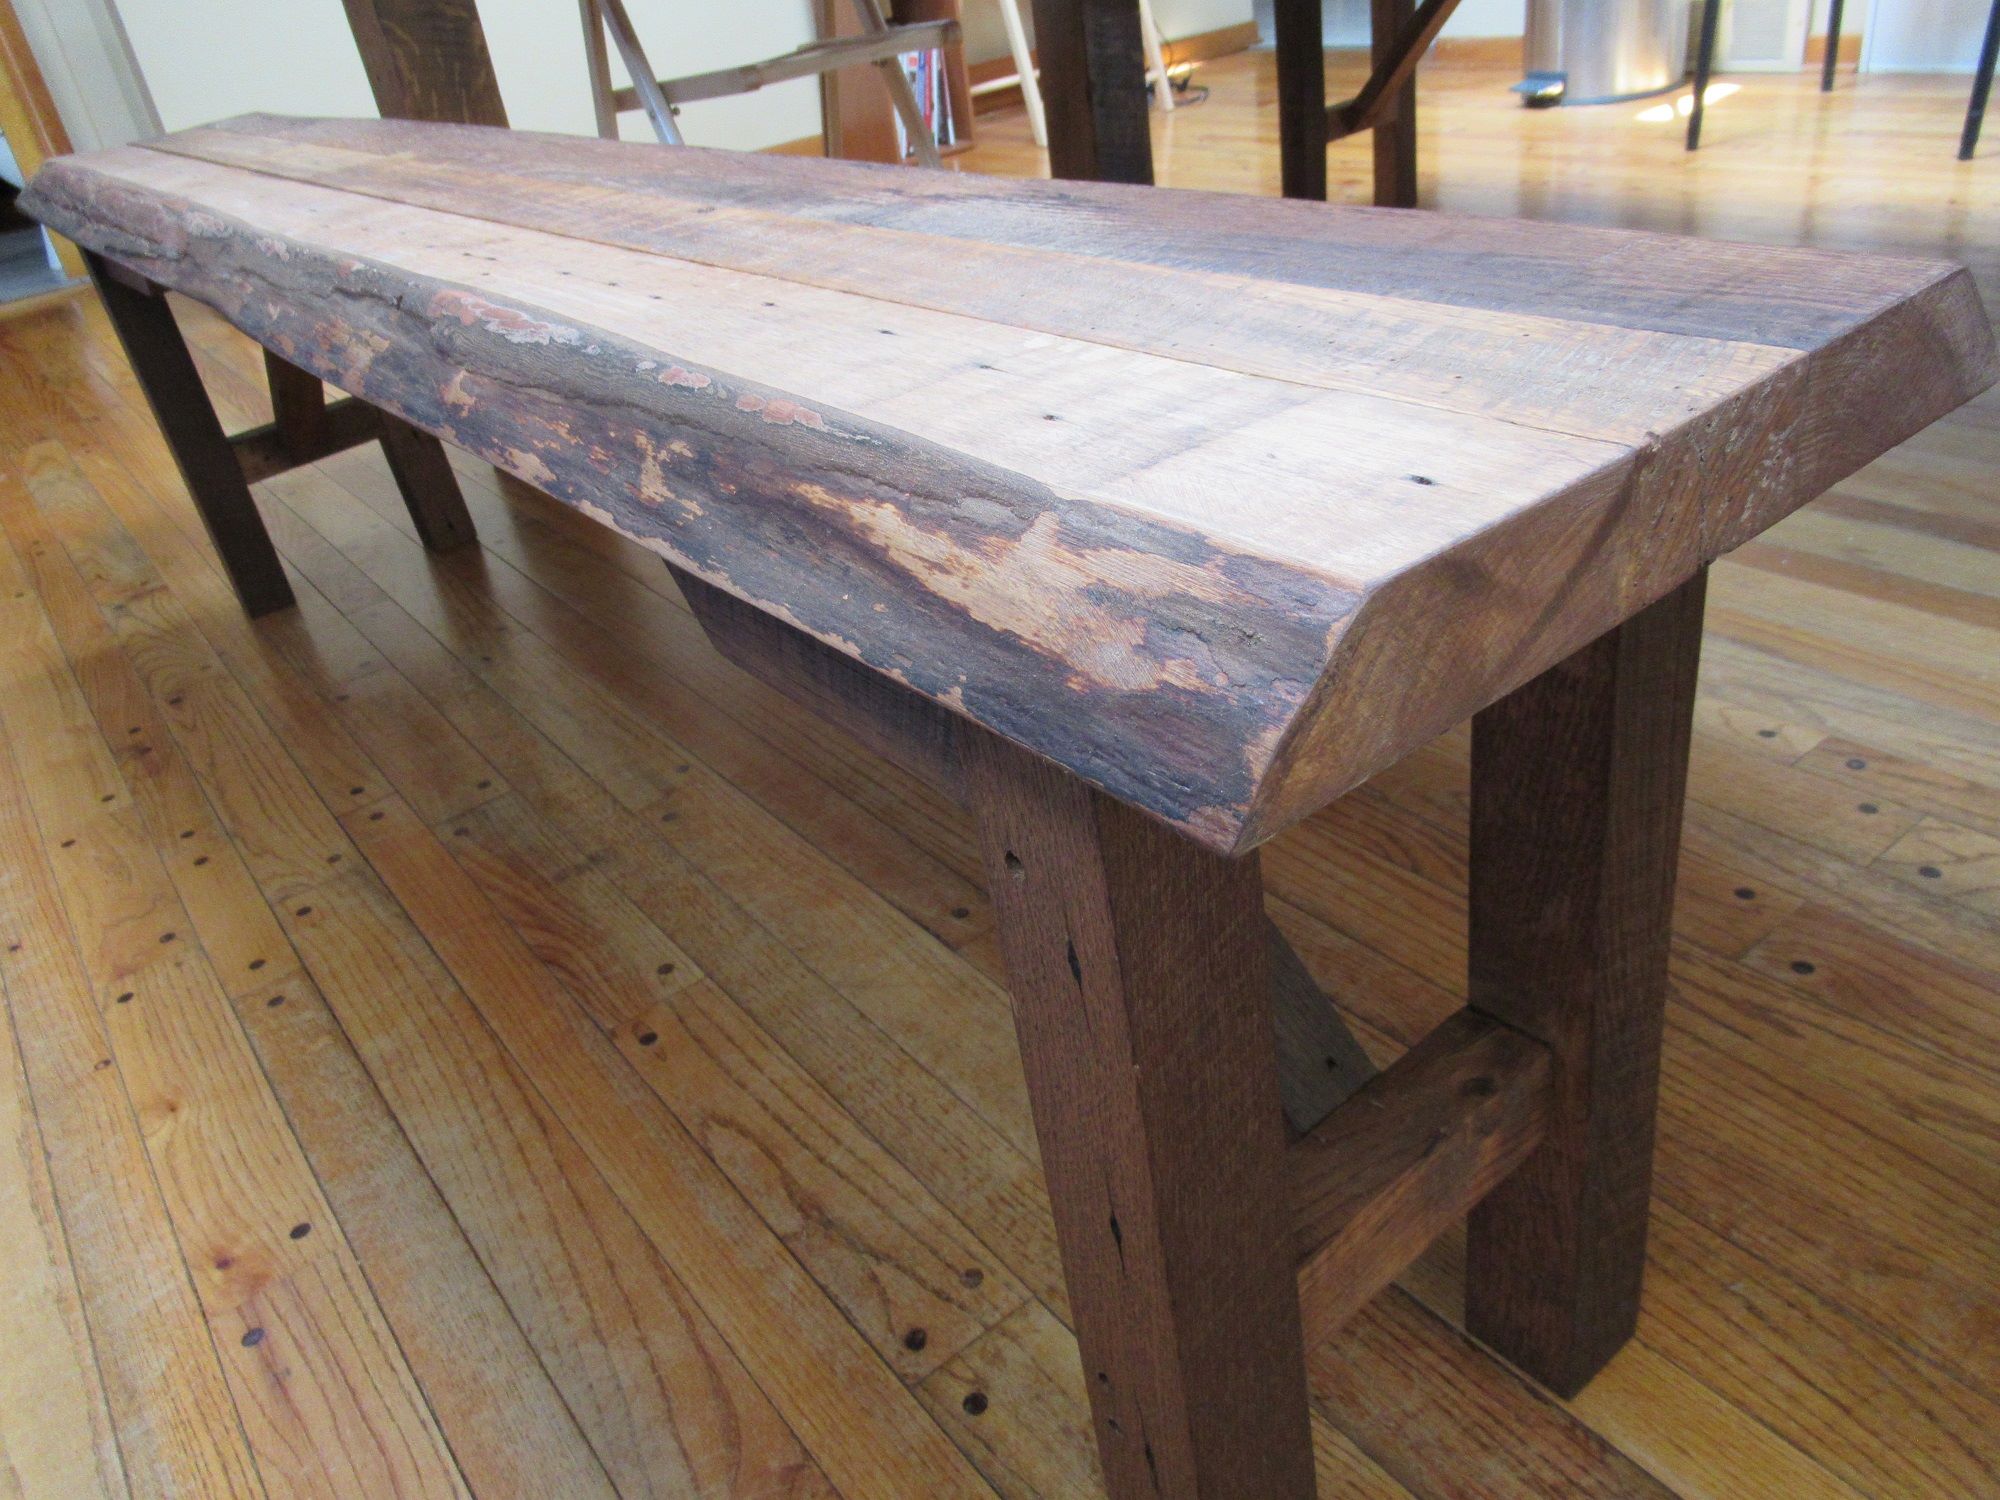 A custom built barnwood bench, made for one of our viking tables